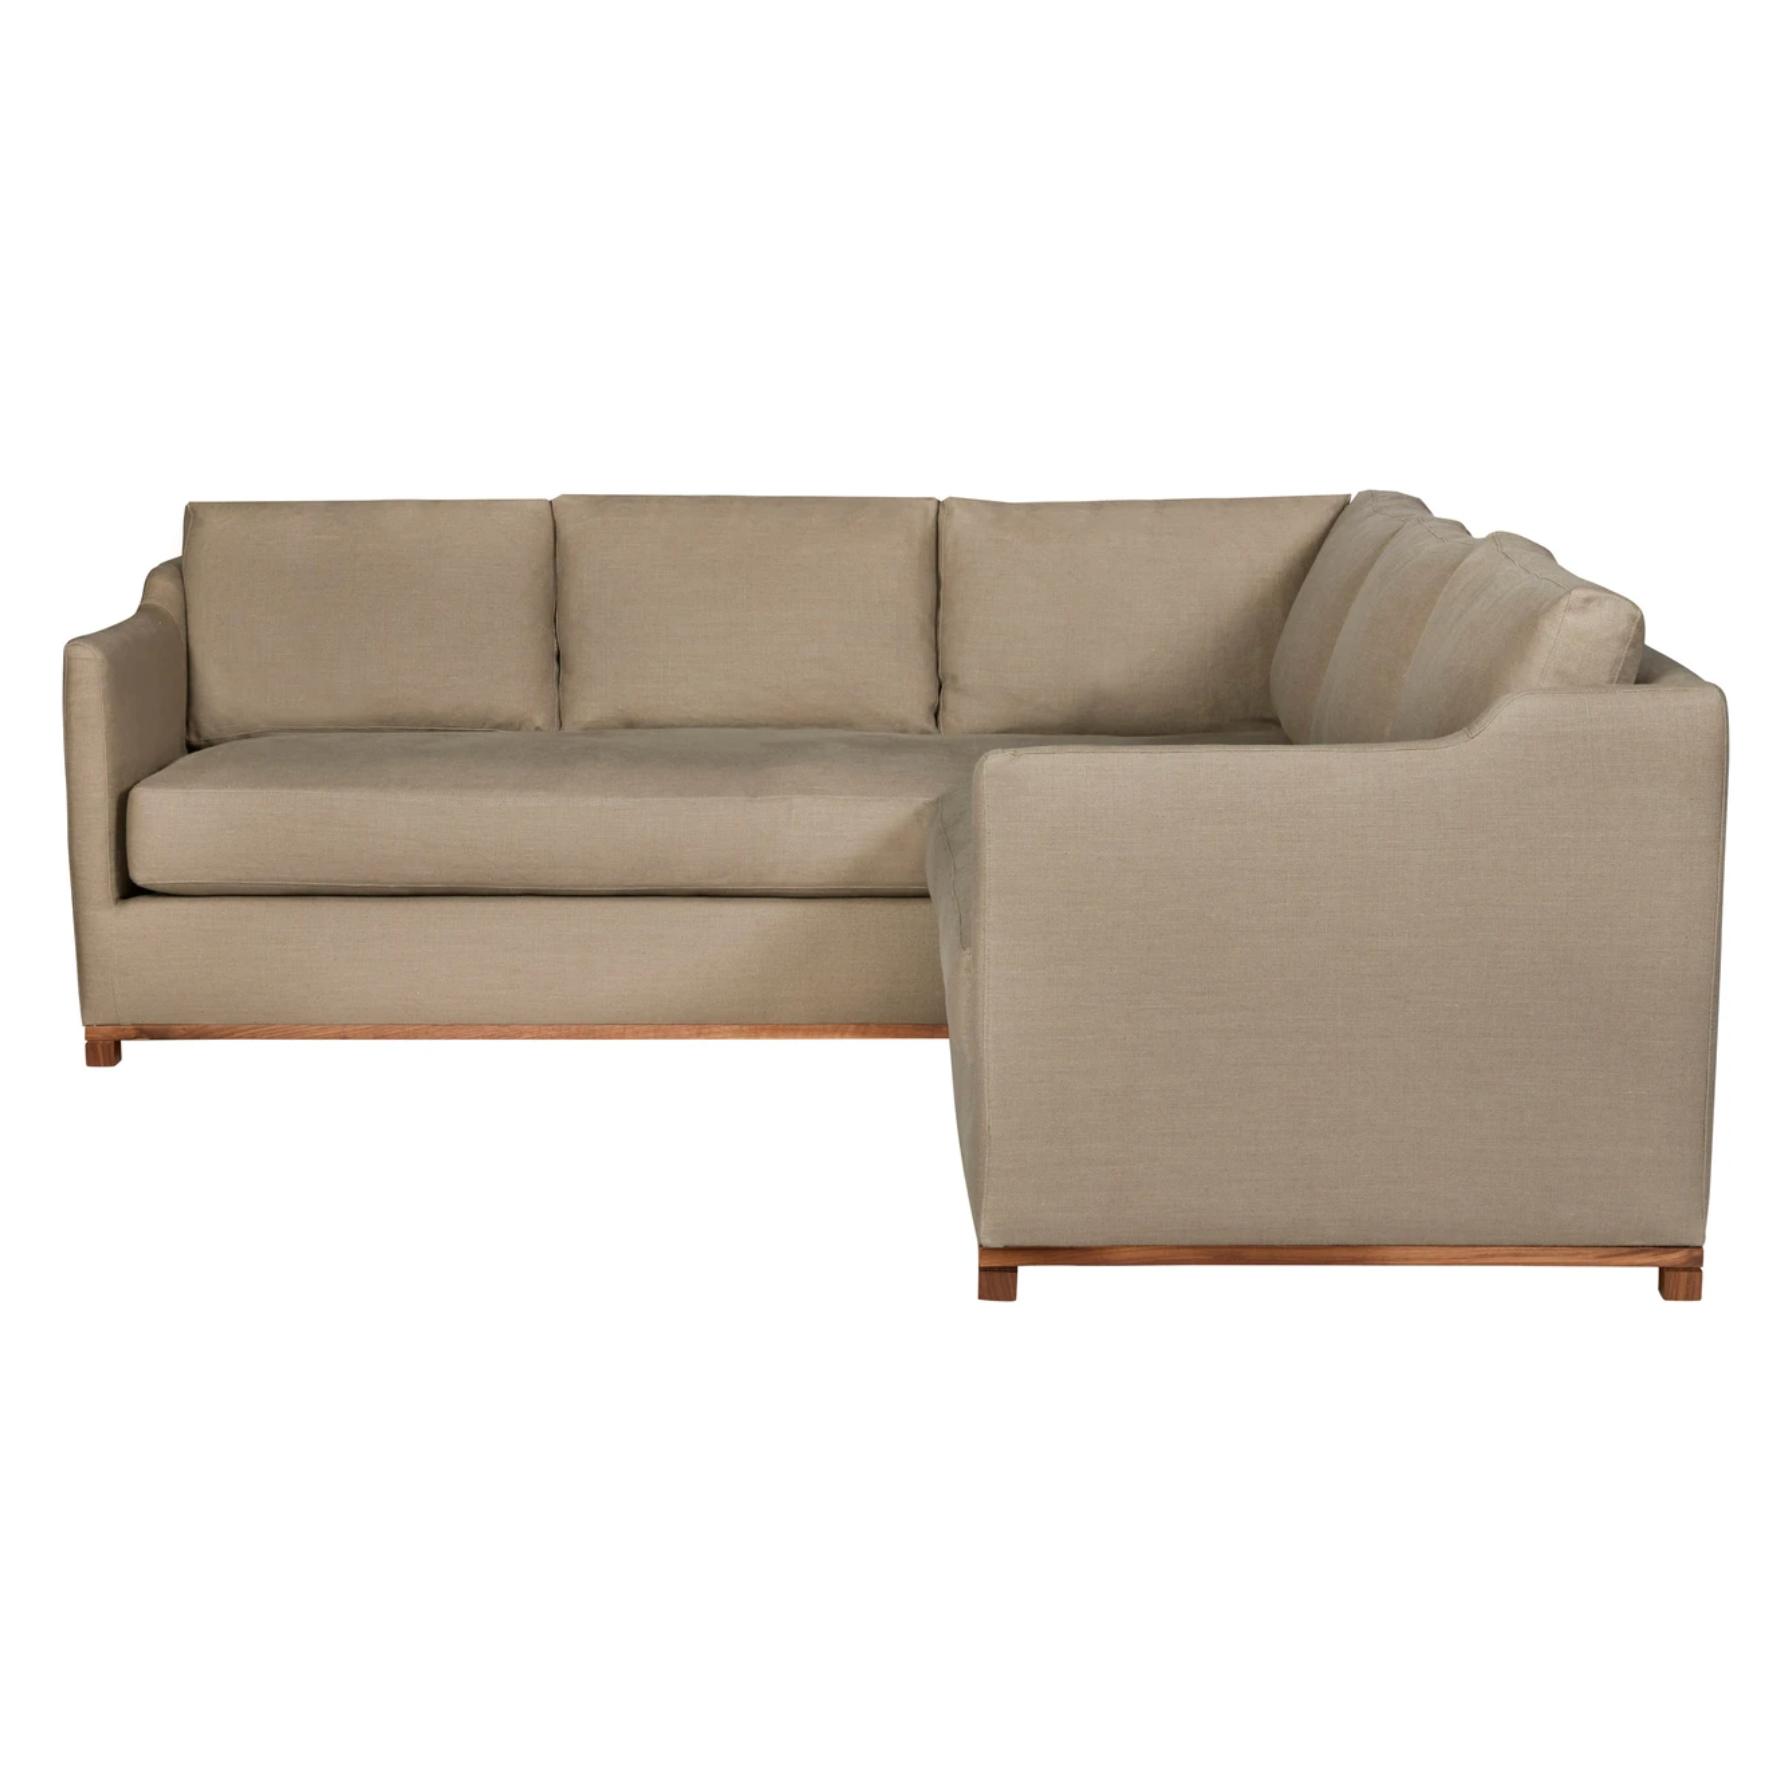 The Kardell Upholstered 2 arm Sectional by Cisco Brothers has clean lines and a modern feek. Get the whole family together for game night or getting your friends together, this is a piece that will be everyone's favorite.   Overall: 90"w x 90"d x 30"h